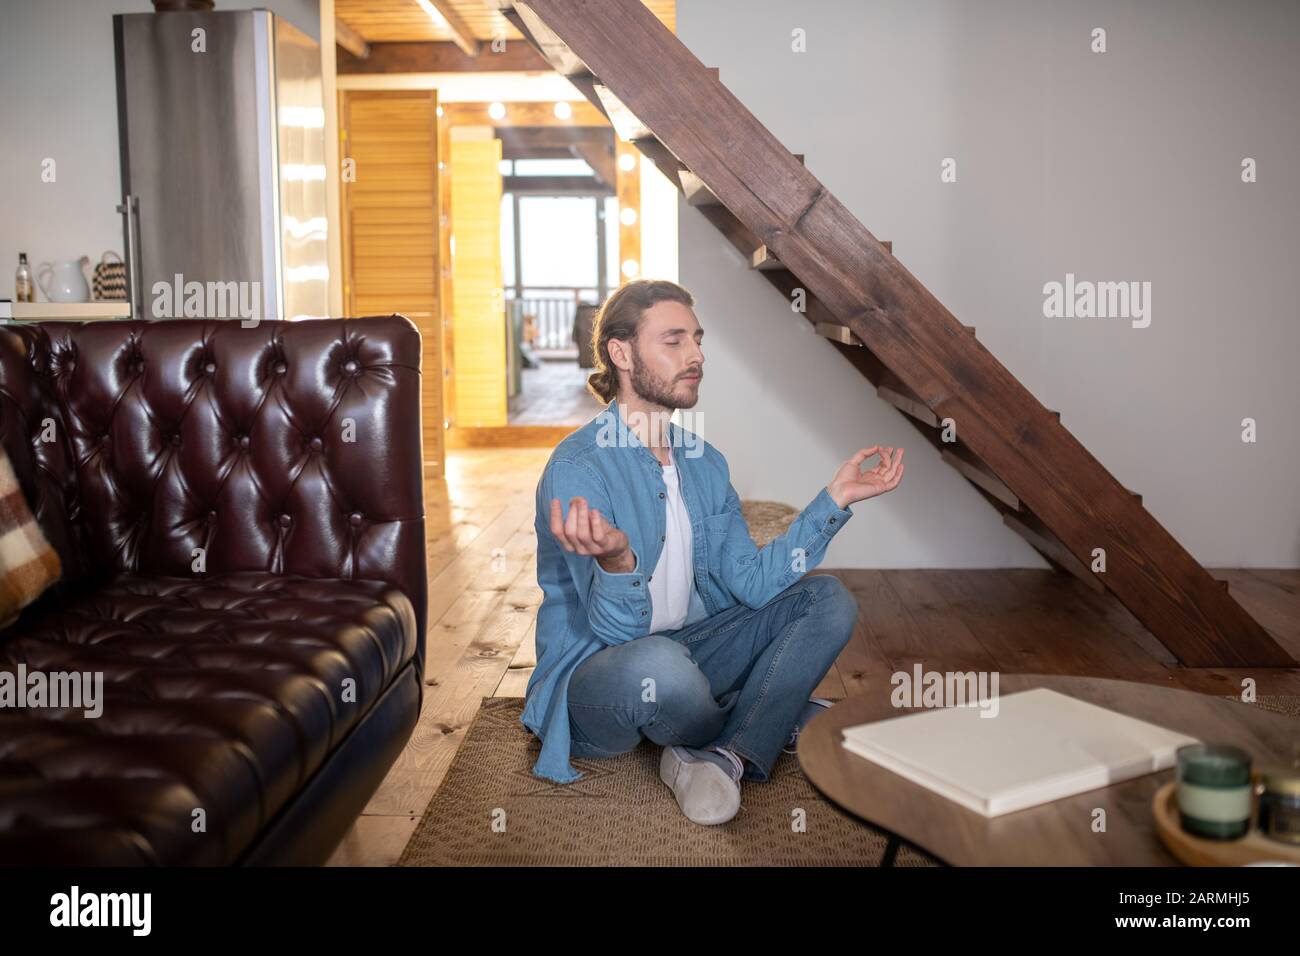 Relaxed young man meditating in his appartment Stock Photo